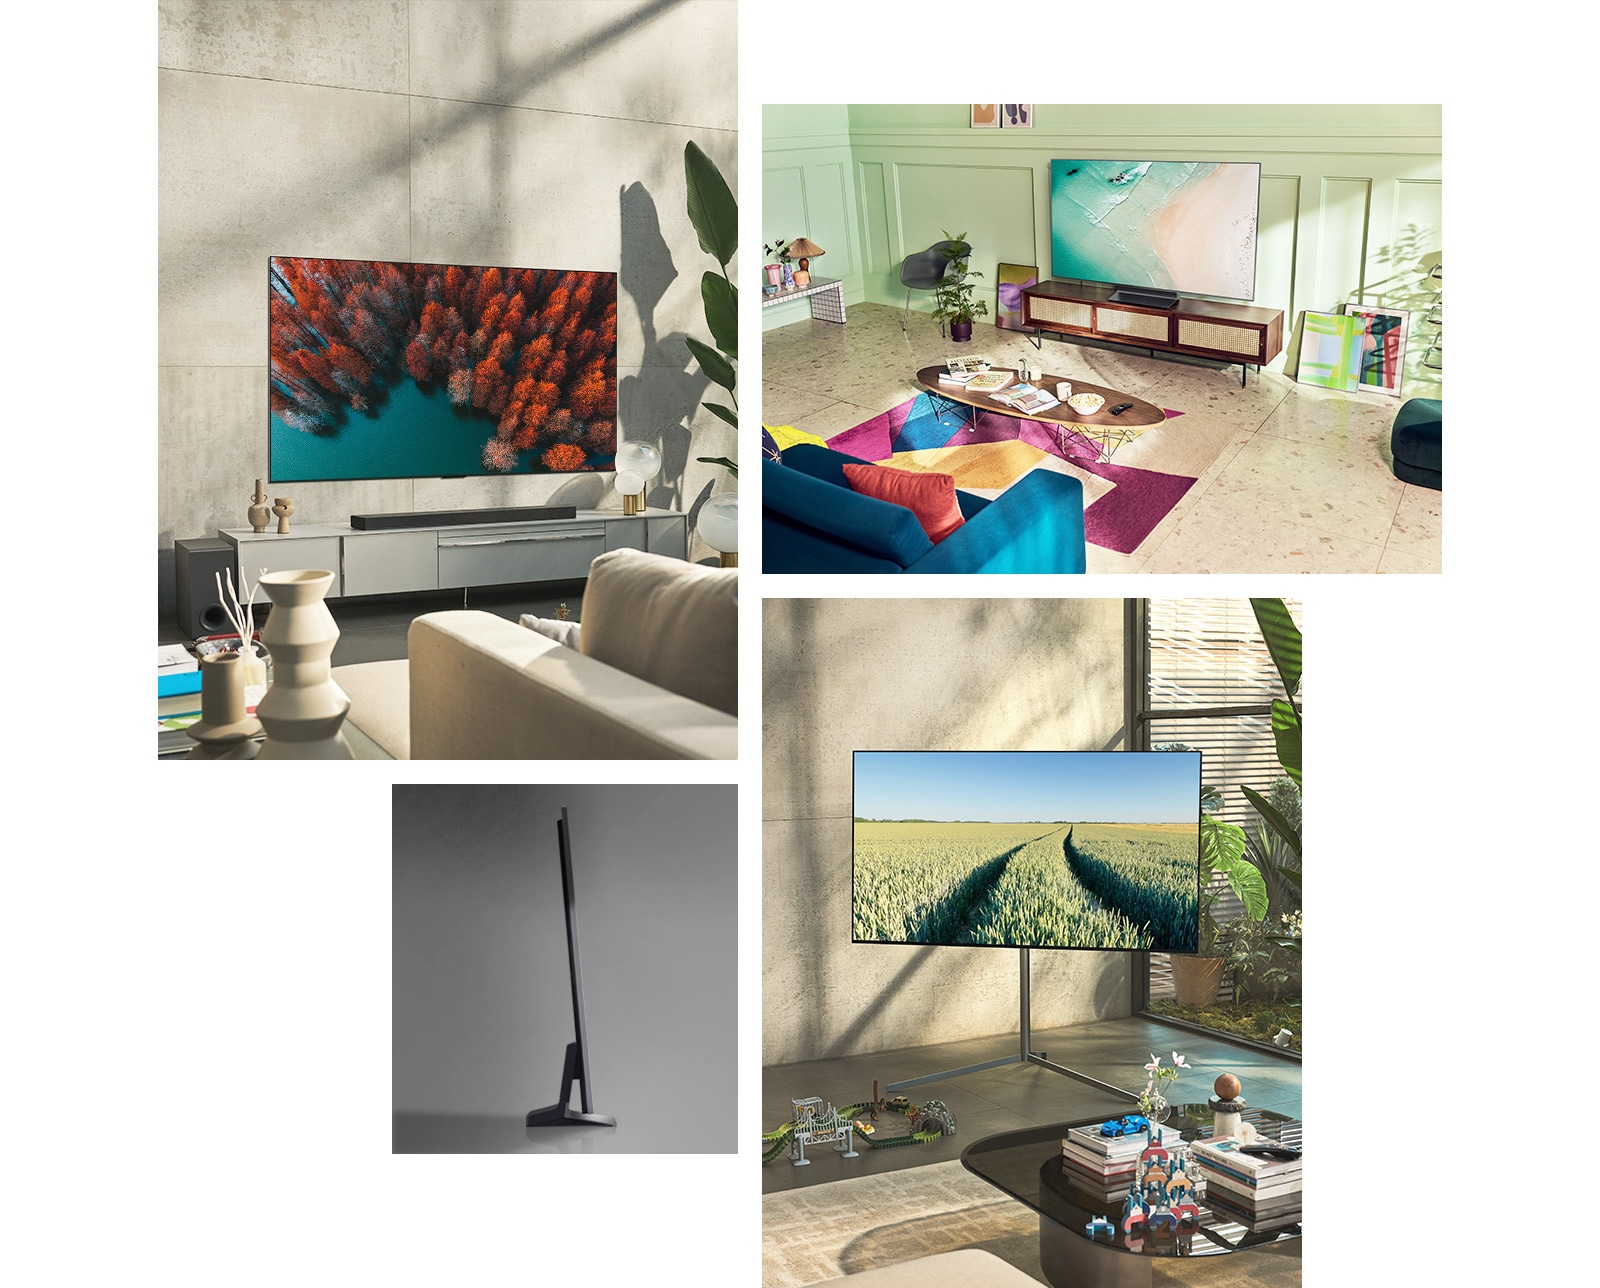 An LG OLED G2 is hung on the wall in a neutral-colored living room with plants and rustic ornaments. An LG OLED G2 sits on a TV stand in a mint green room with colorful art and furnishings. An LG OLED G2 with Gallery Stand is in the corner of a room in a family home. A side view of the ultra-slim edge of LG OLED G2.